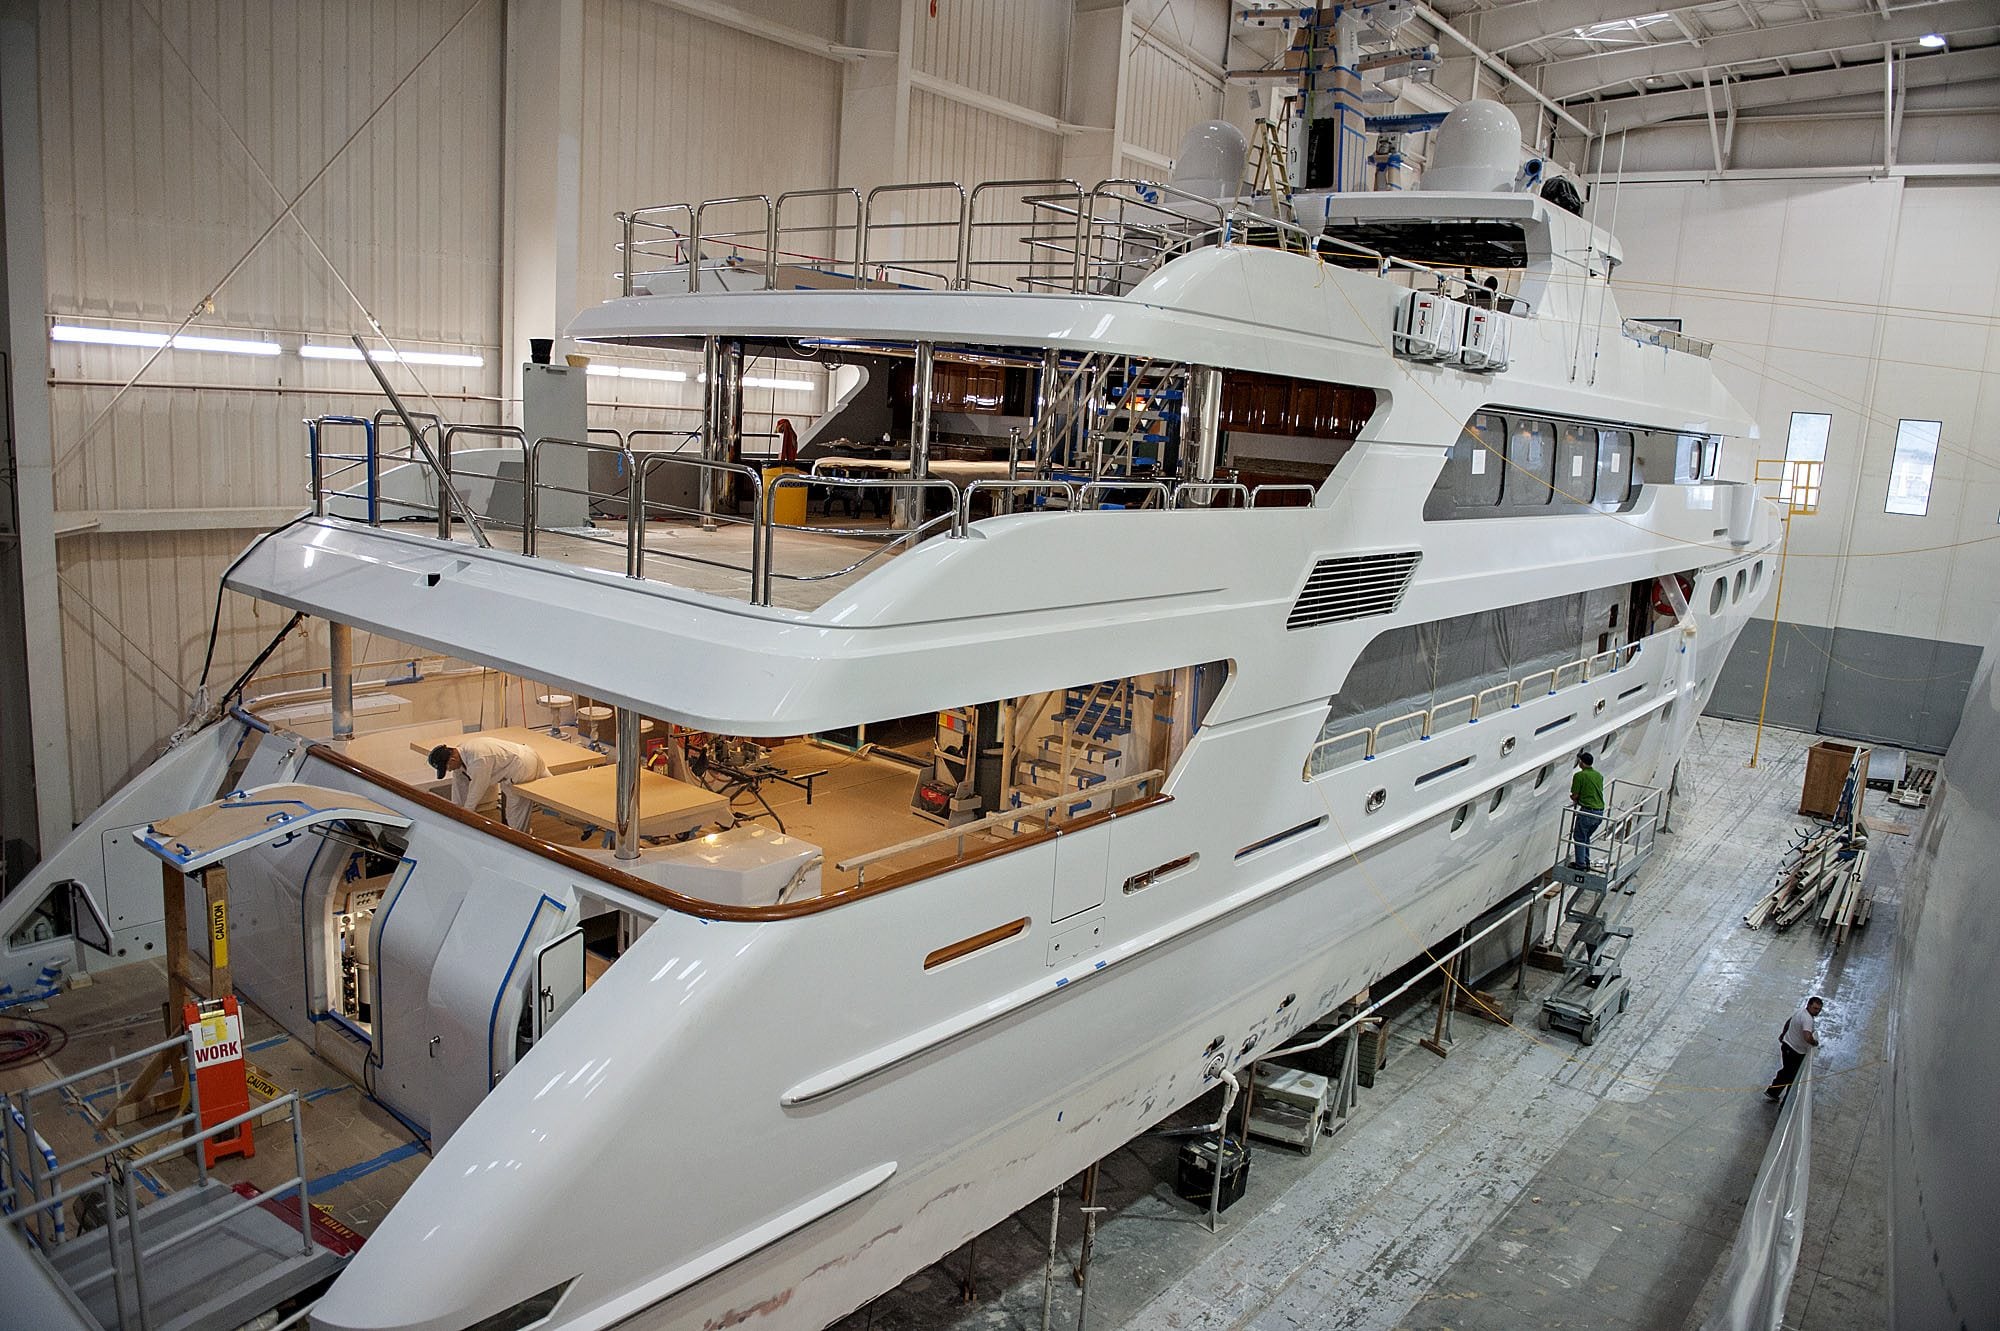 Employees of Christensen Shipyards work aboard a luxury yacht under construction Wednesday afternoon, Jan. 20, 2016 at in Southeast Vancouver.